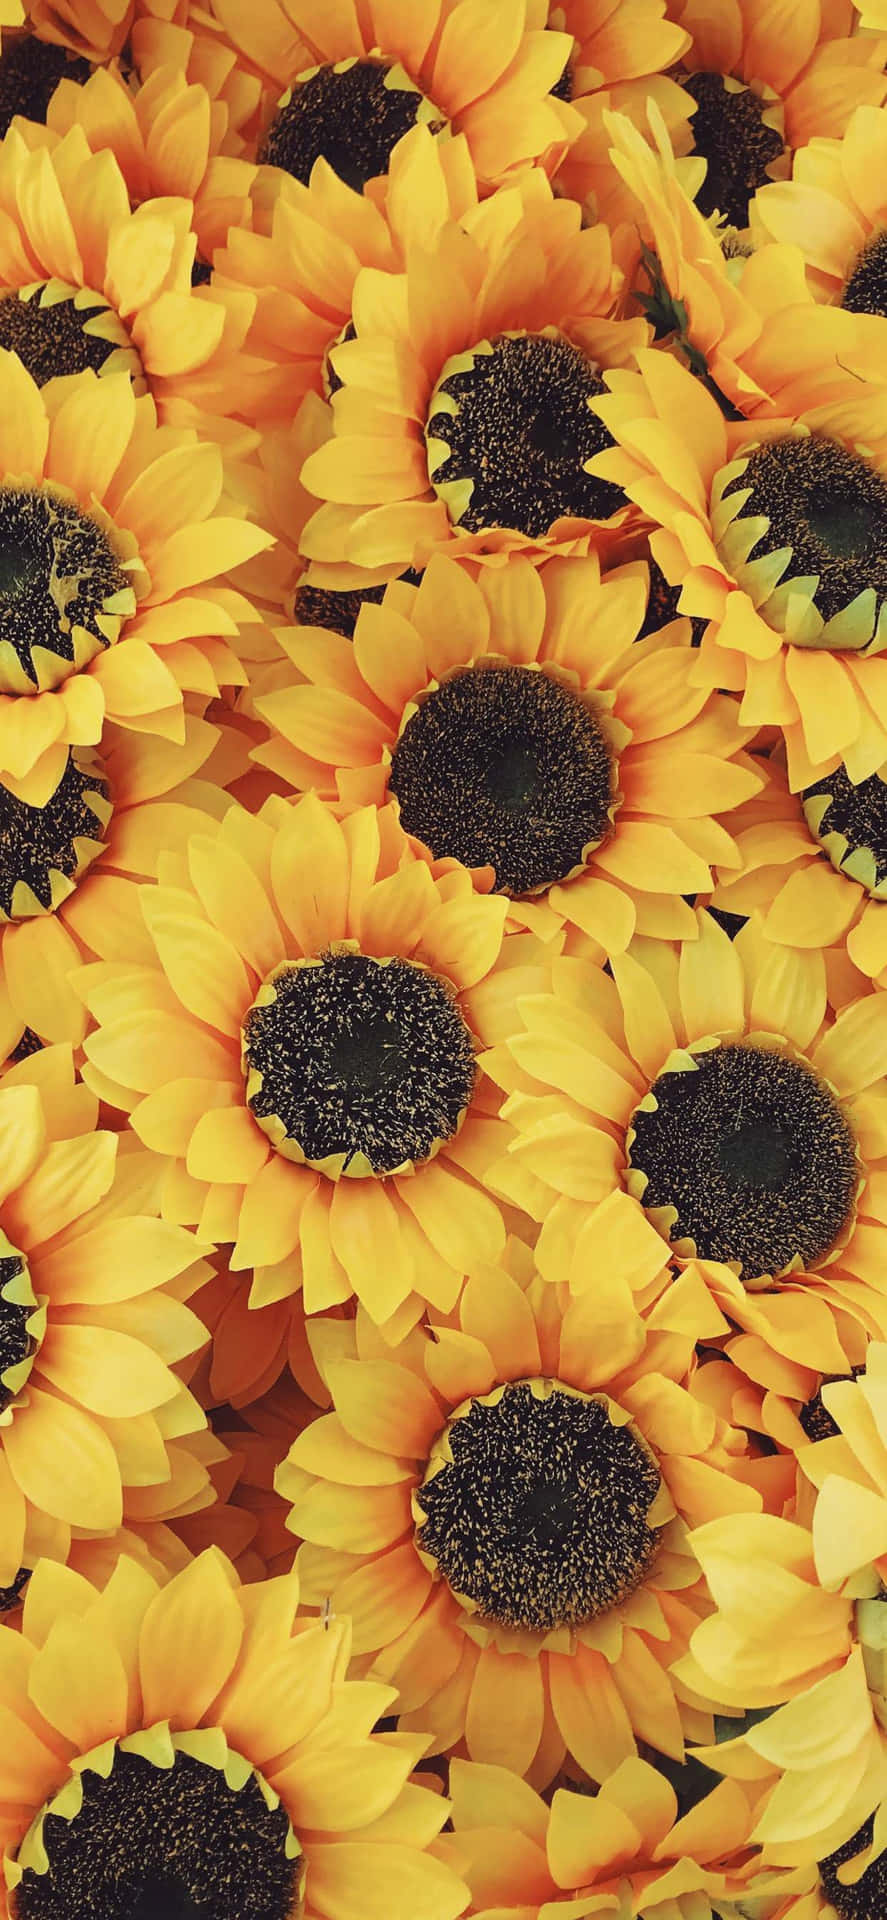 Add some color and life to your iPhone with this beautiful sunflower aesthetic. Wallpaper